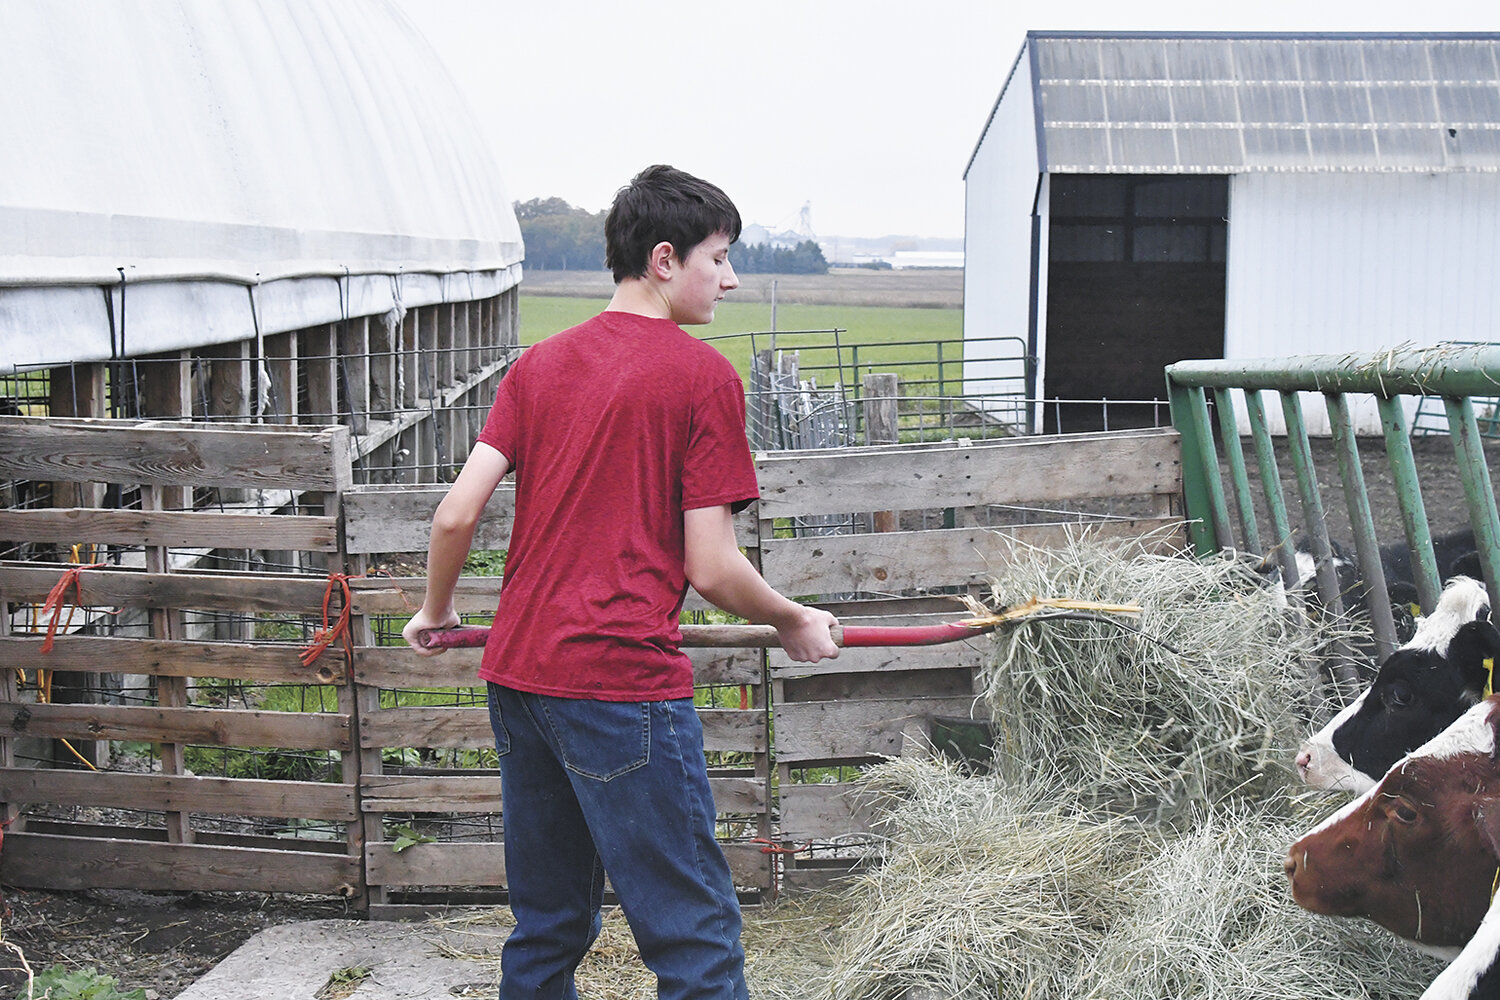 Wyatt Naatz feeds hay Oct. 19 at the Naatz family’s dairy farm near Mantorville, Minnesota. Naatz is a freshman and helps on the farm as he is able with his online high school classes.